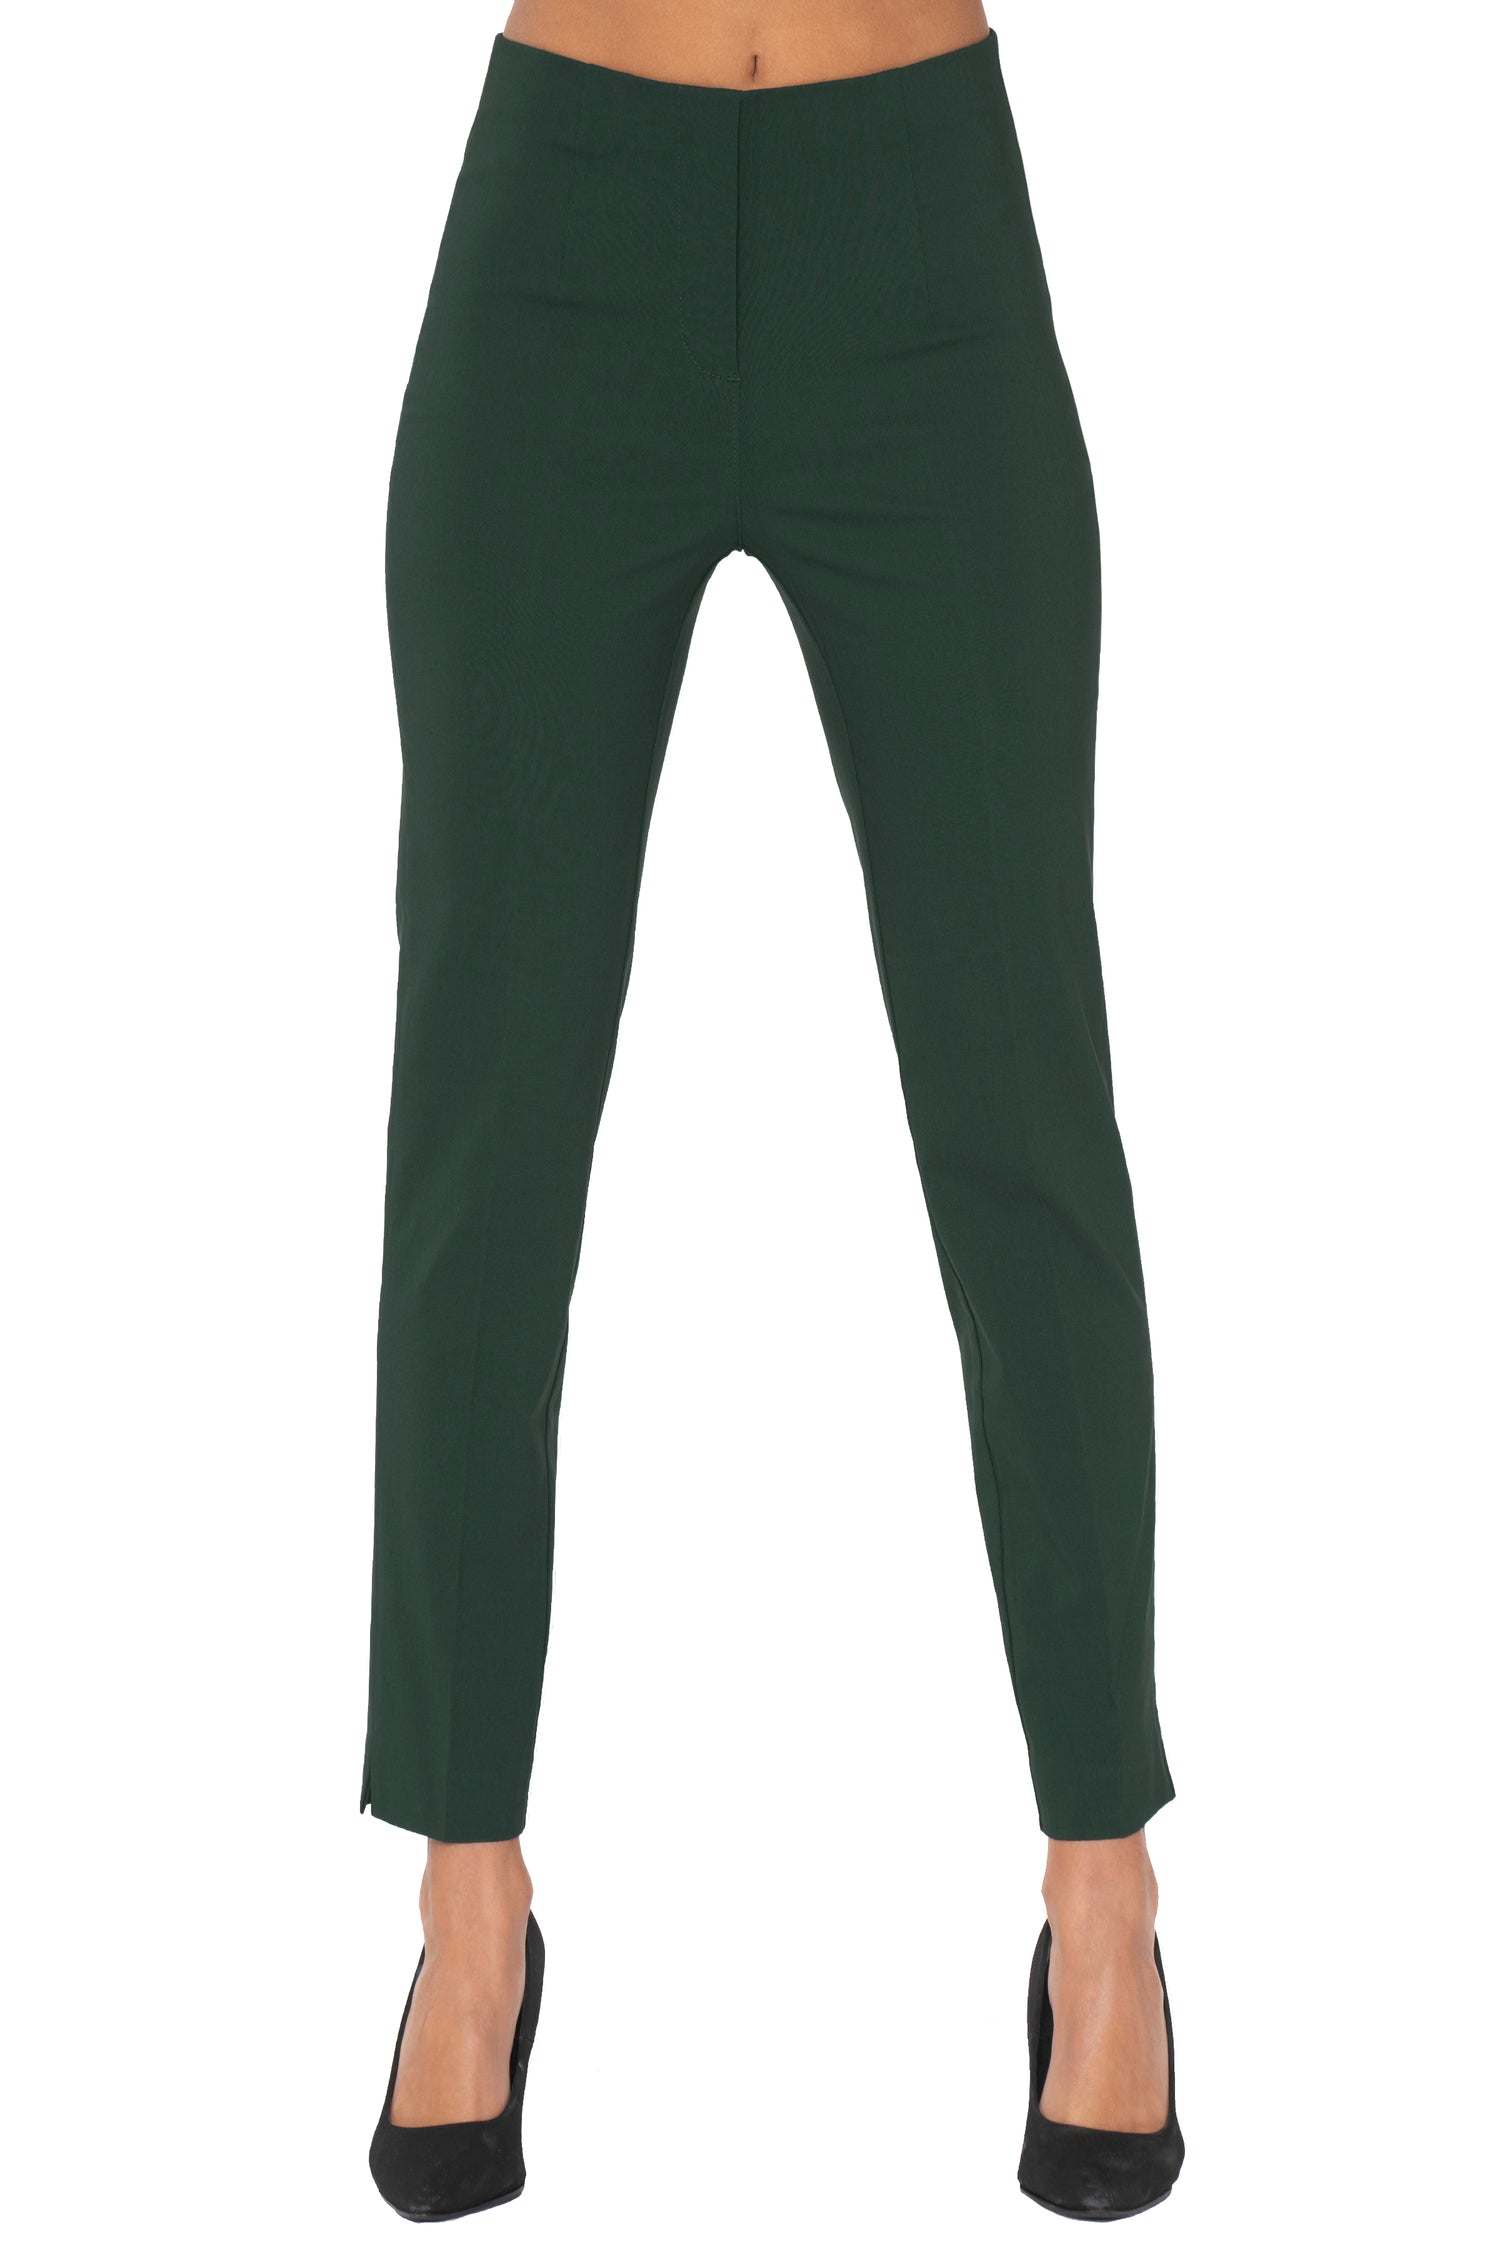 Women Relaxed Fit Colorful and Tapered Leg Cut Pull On Dress Pants